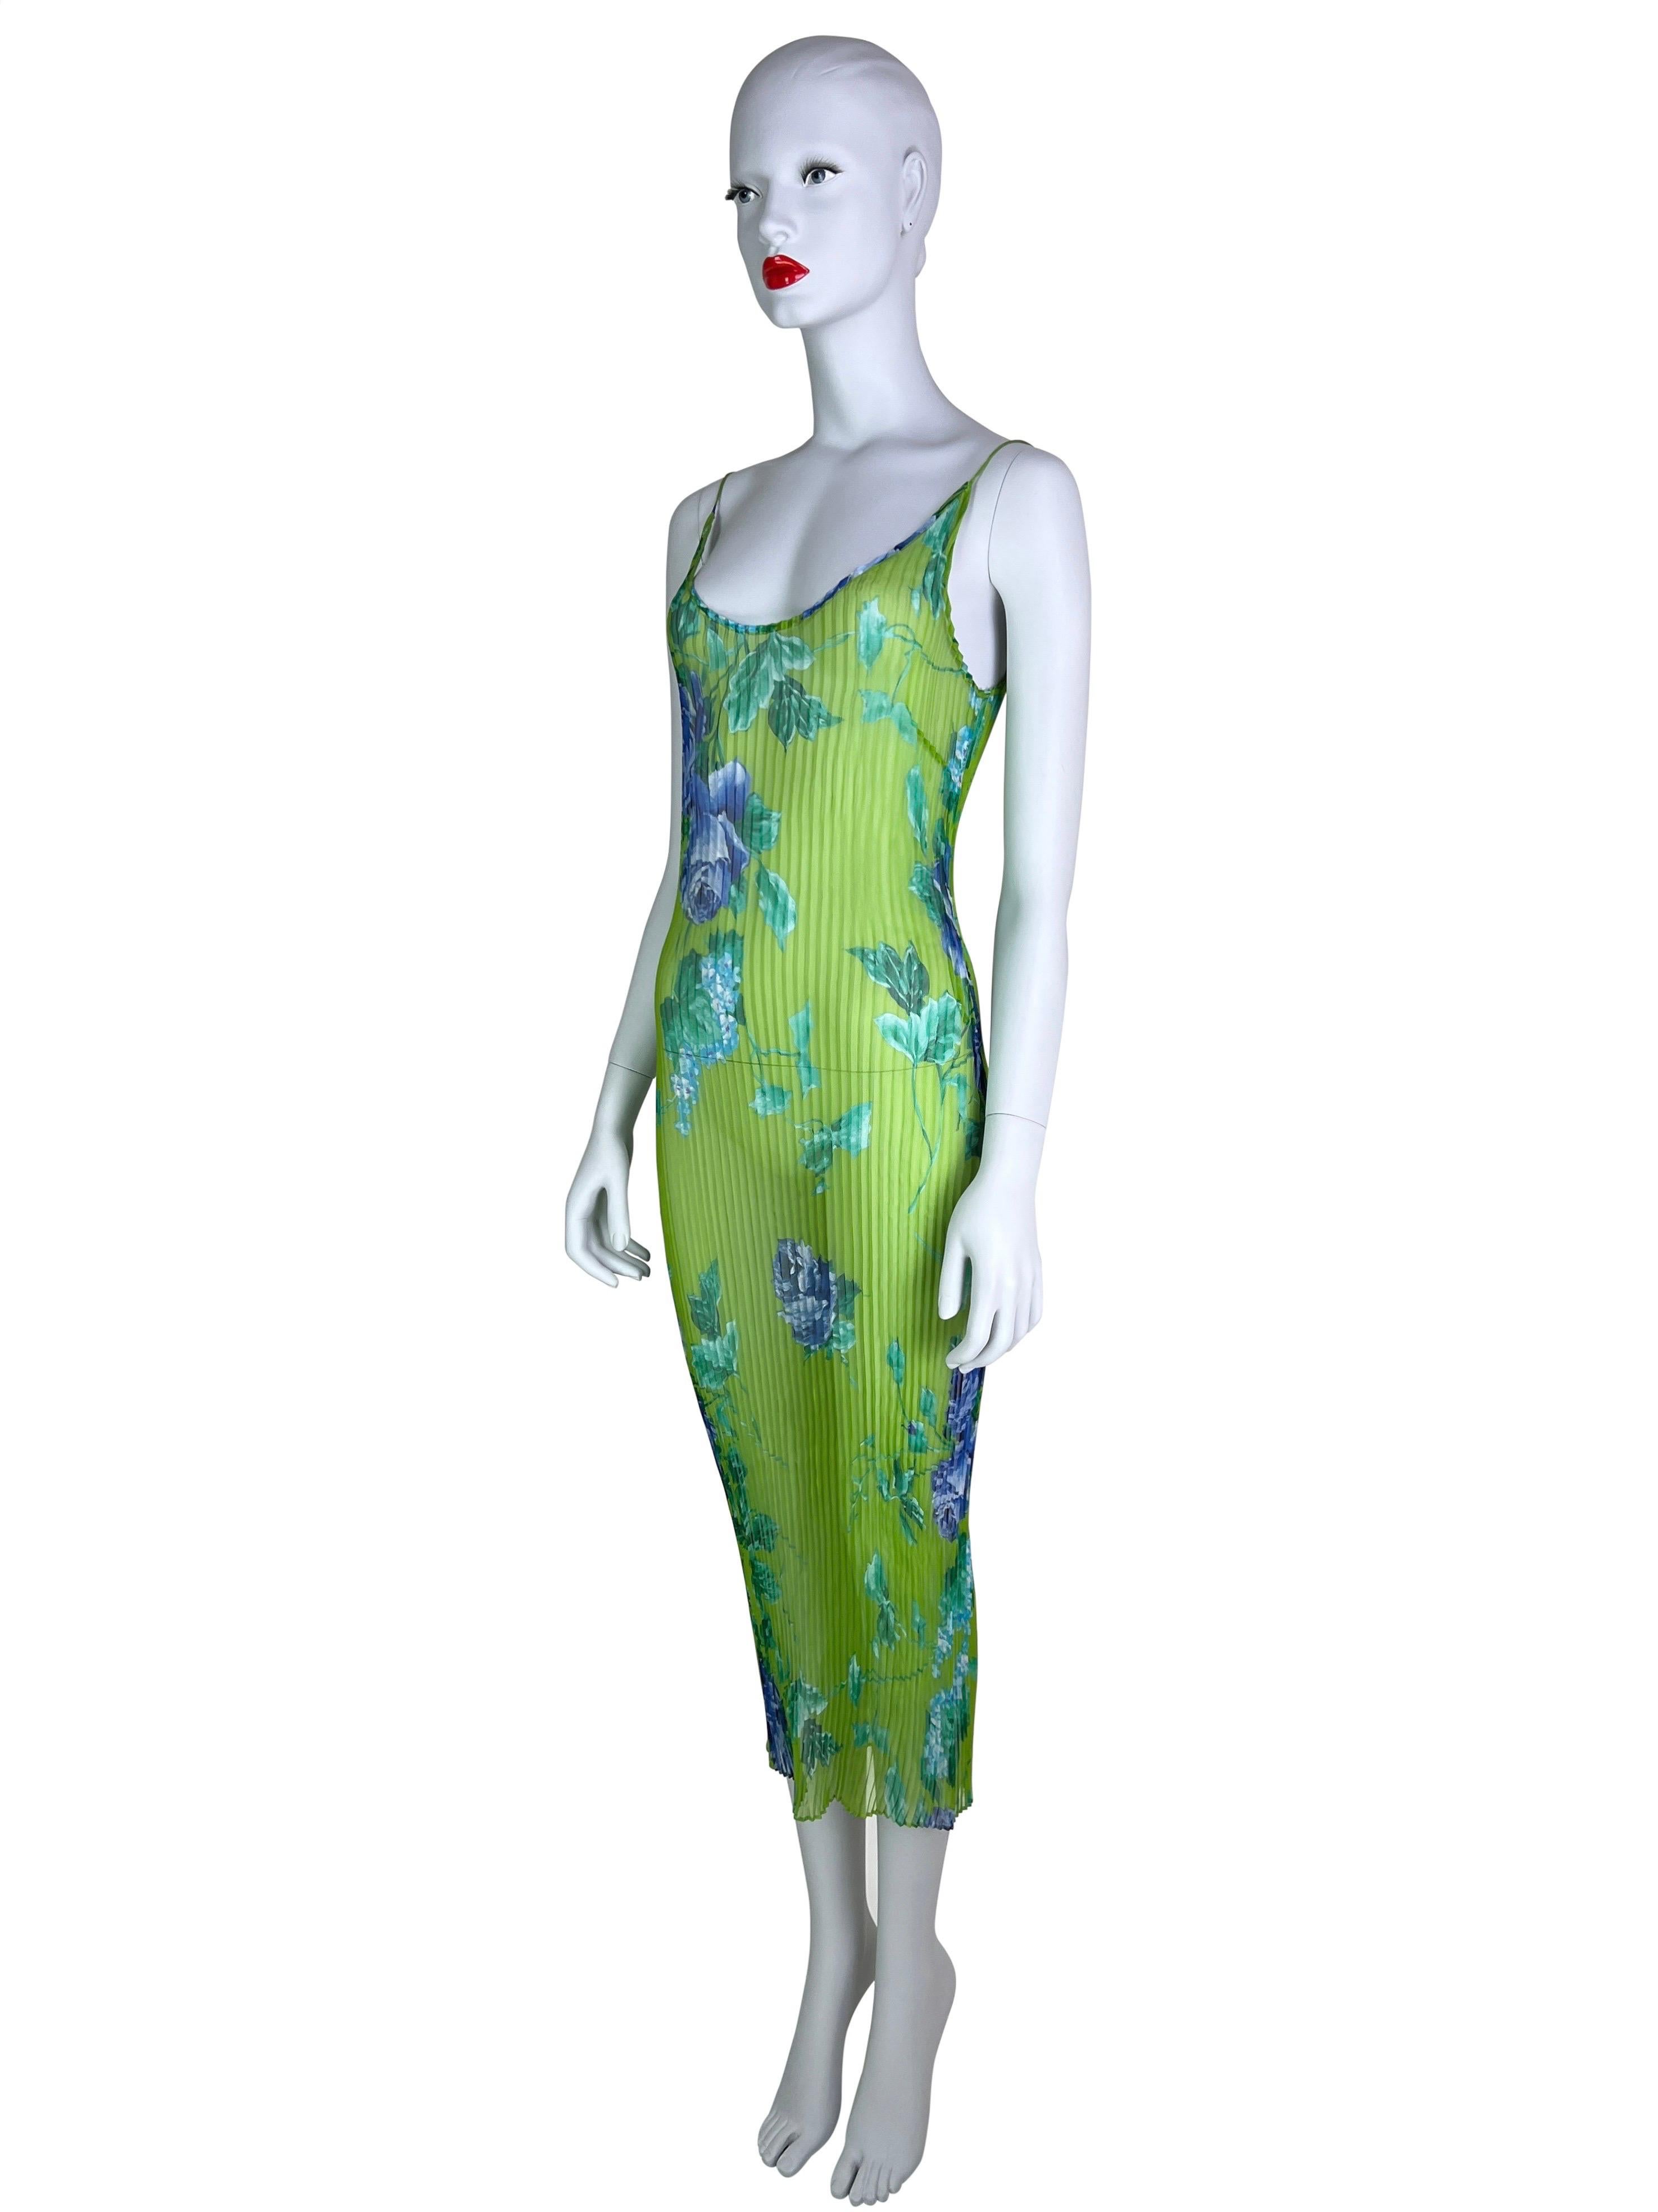 A gorgeous 100% plisse silk-chiffon dress in a vivid apple green color for endless styling possibilities.

Size IT 44, which normally corresponds to Large, but would fit sizes S through L due to the pleating of the fabric.

Measurements (flat lay on